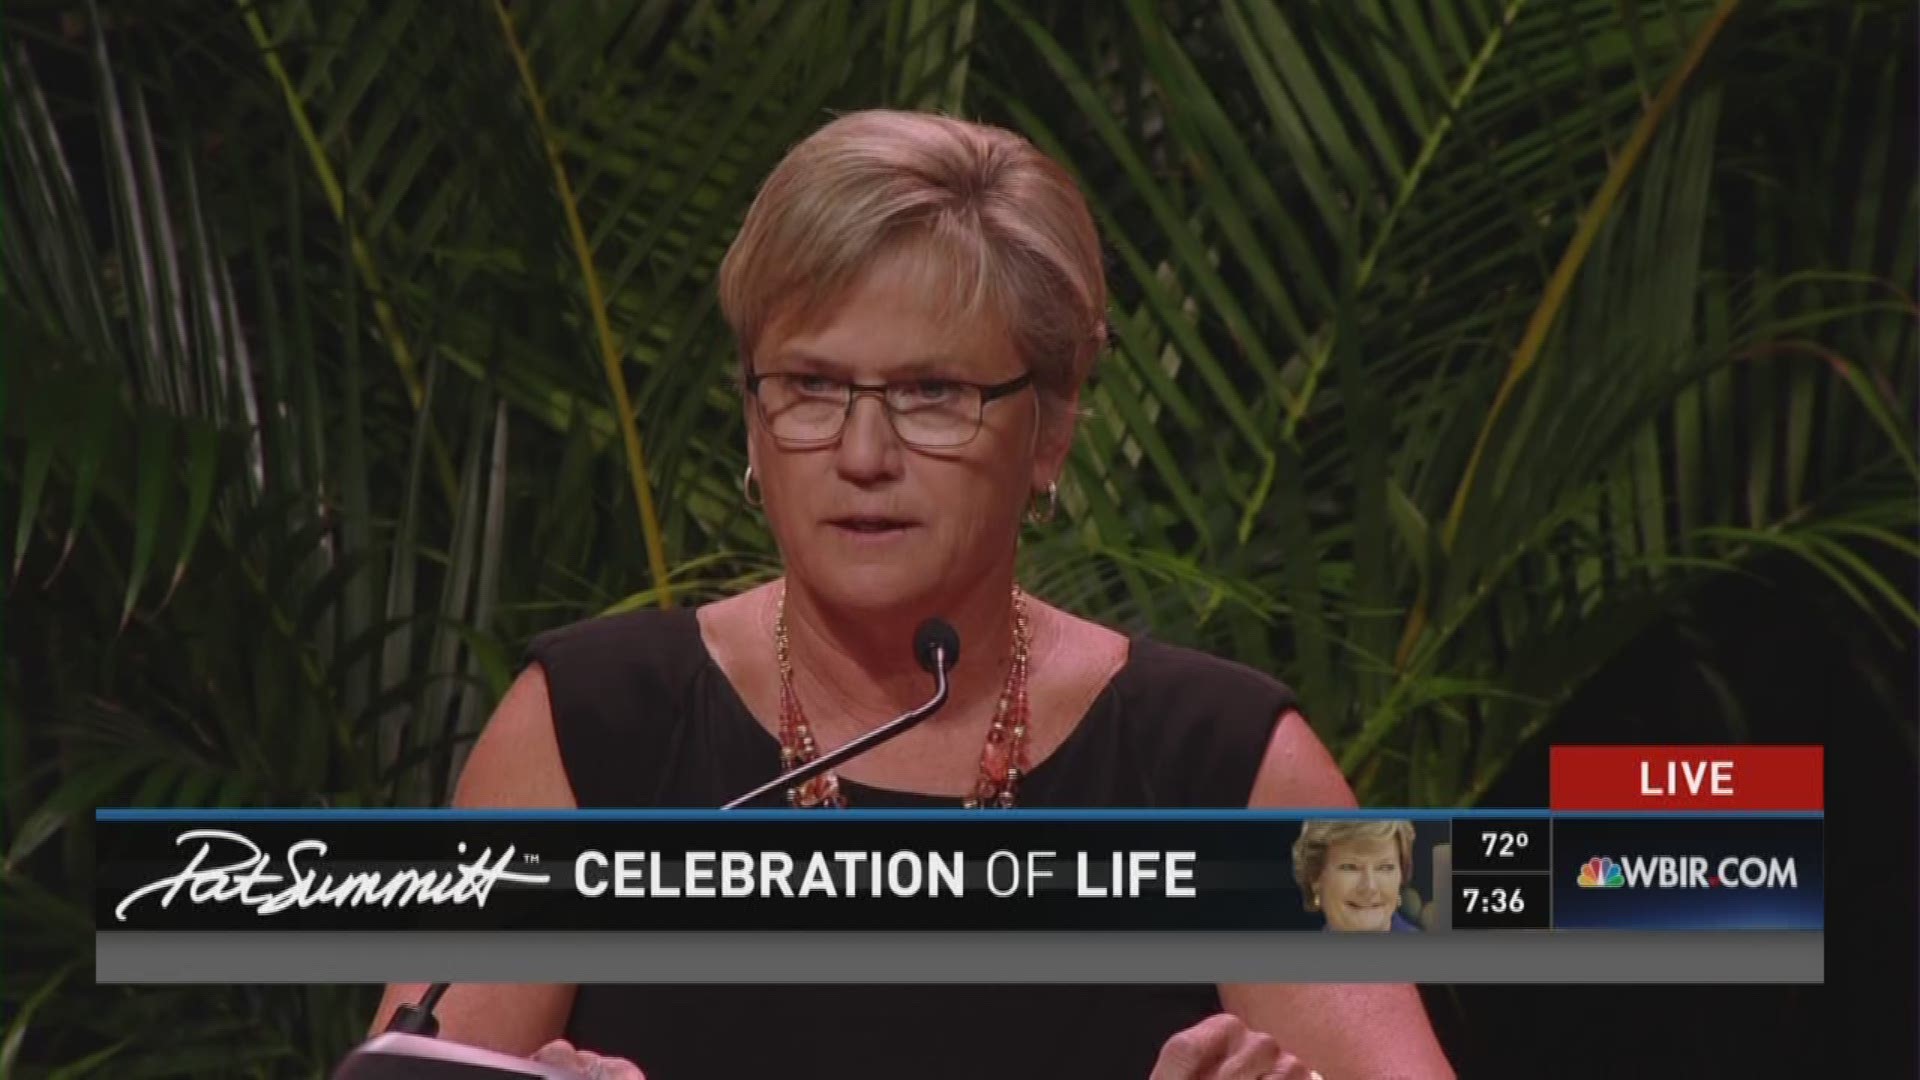 Holly Warlick shared her memories of Pat Summitt including how the coach had a creative way to get out of speeding tickets and embodied the Lady Vol legacy.